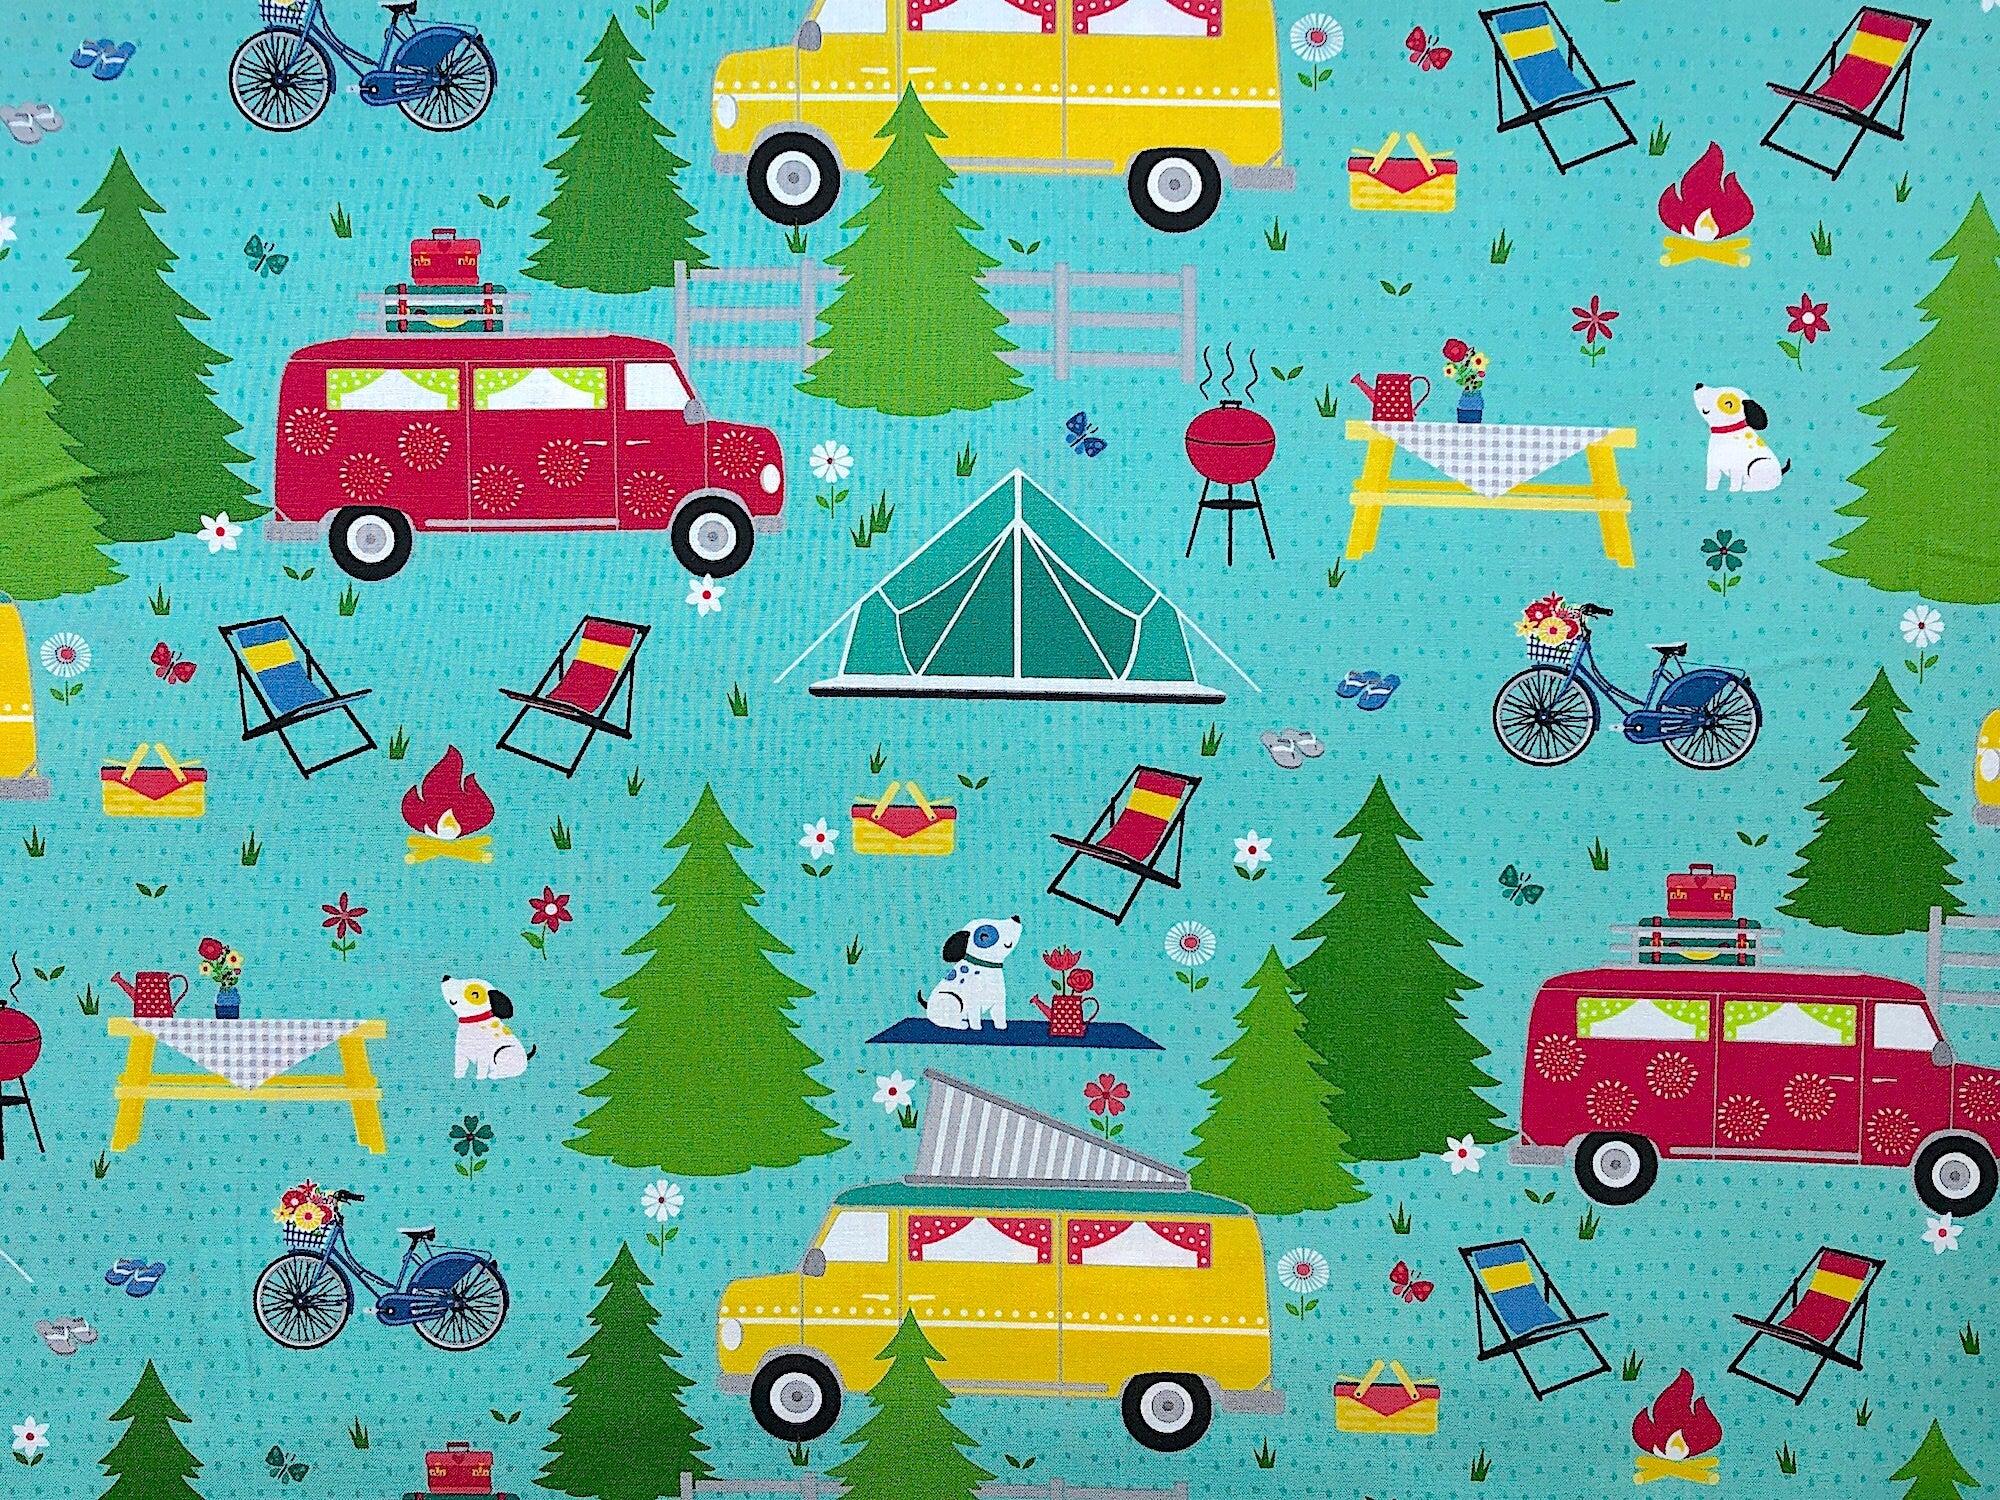 This fabric is called Adventure Time. The teal colored fabric is covered with red and yellow camping vans, trees, dogs, grills, picnic tables and more.